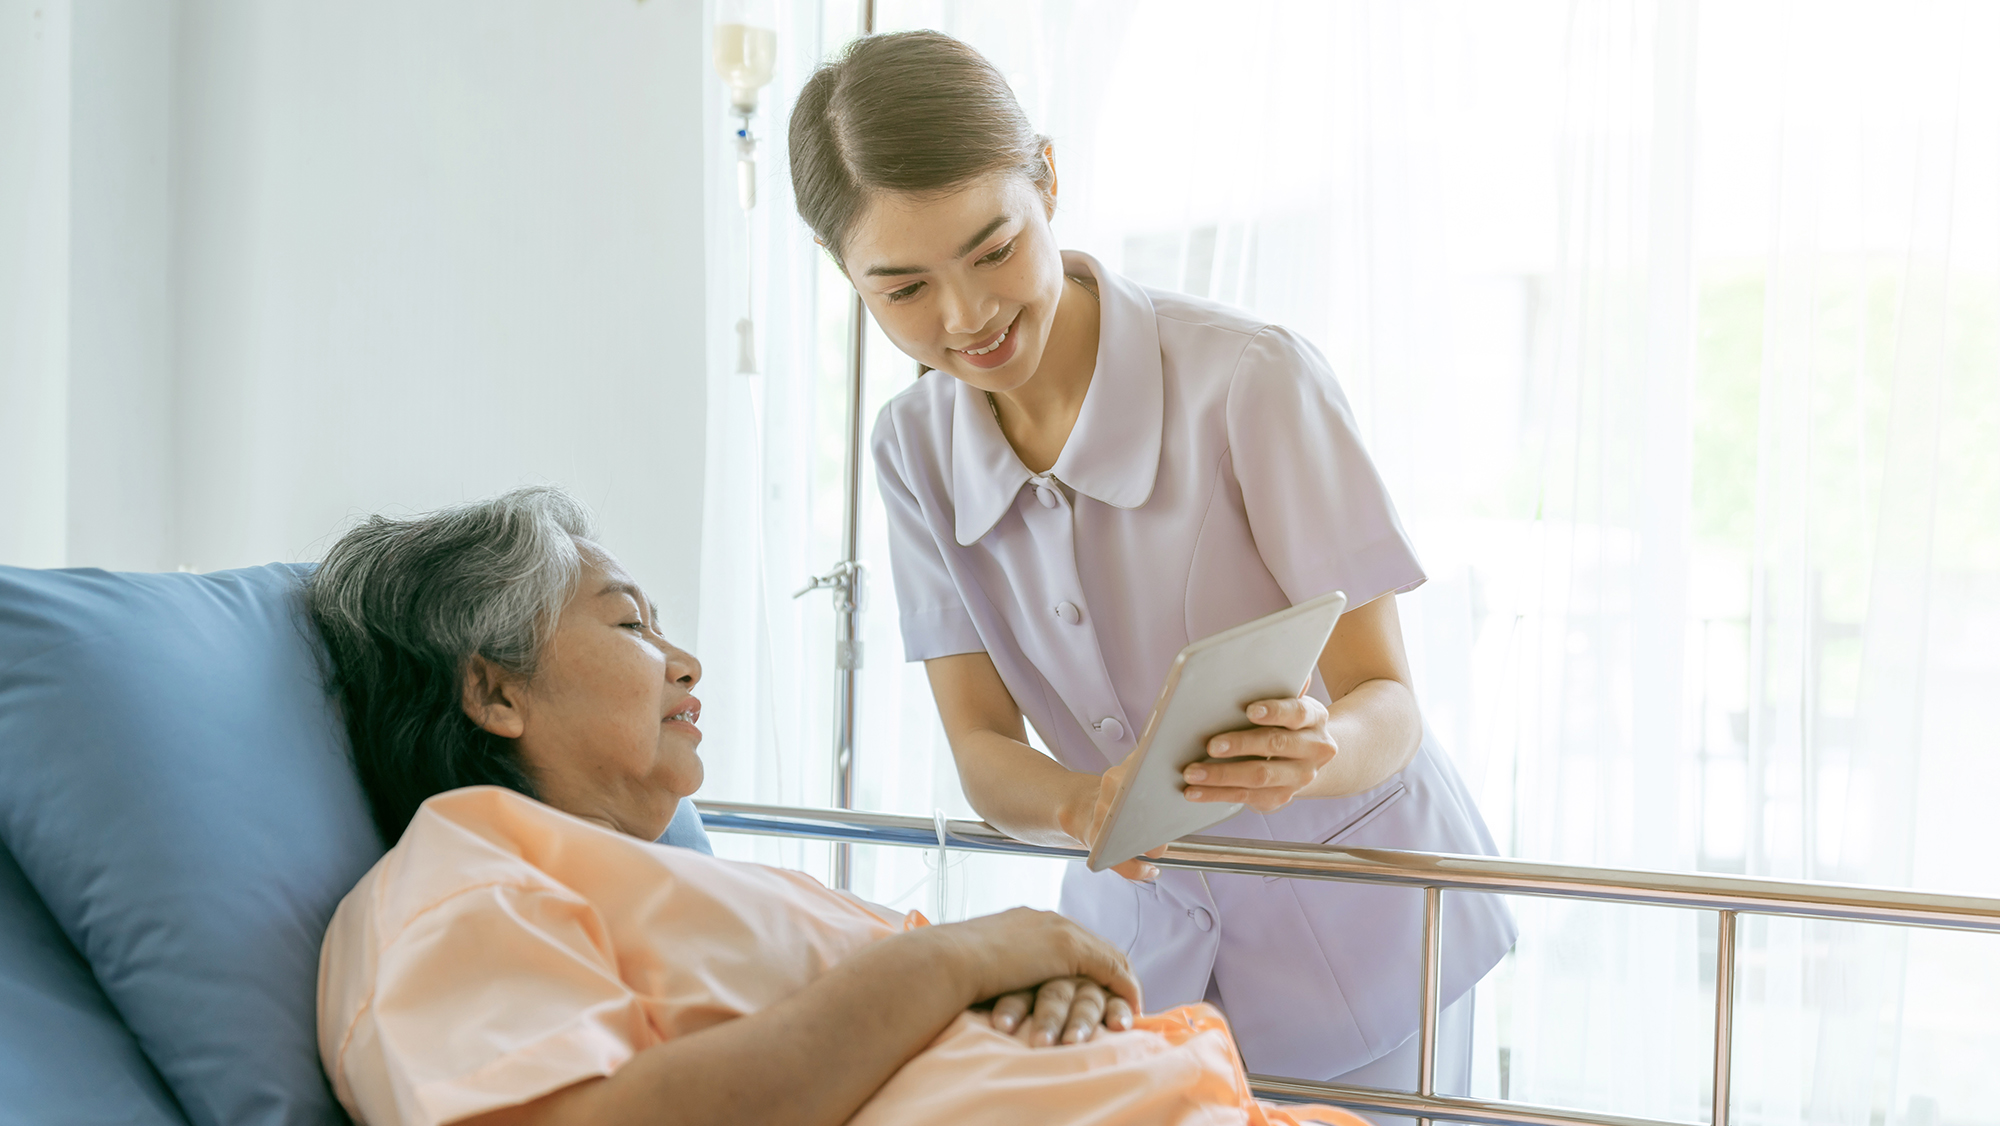 What Makes a Good Hospice Nurse: Essential Qualities and Skills